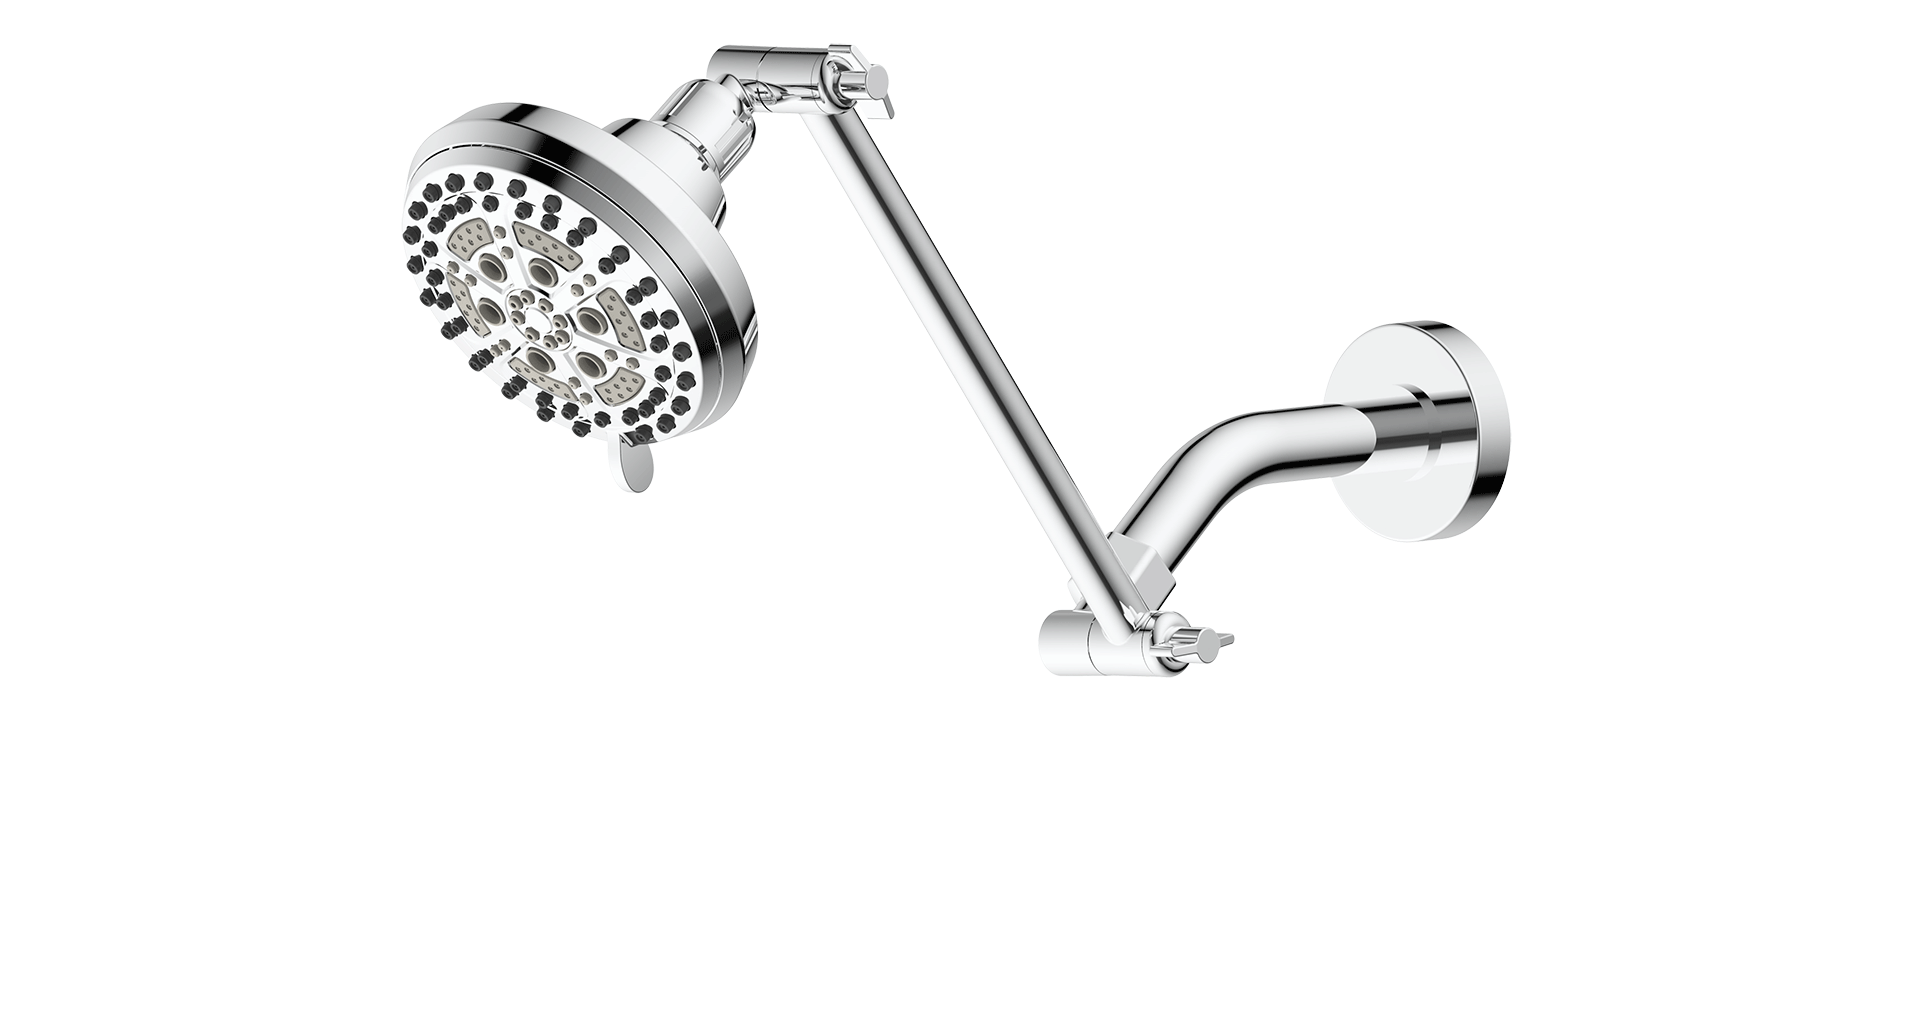 Stainless steel adjustable shower arm